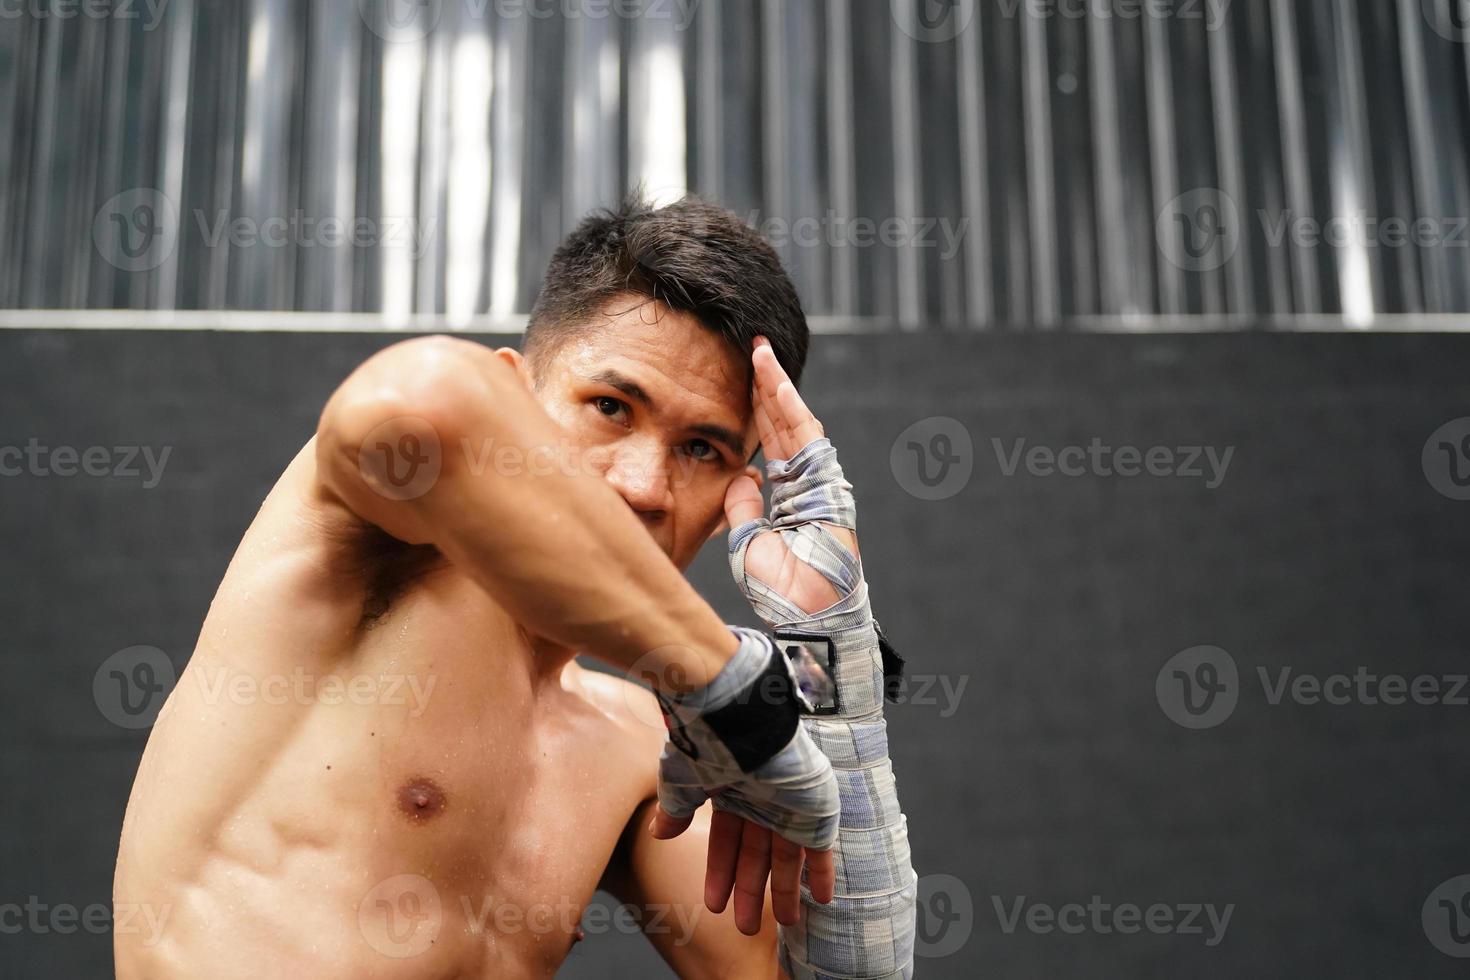 Muay Thai, The martial art of Thailand, The boxer's rehearsal punching before the real fight on the stage It prepares the body for each boxing match. photo